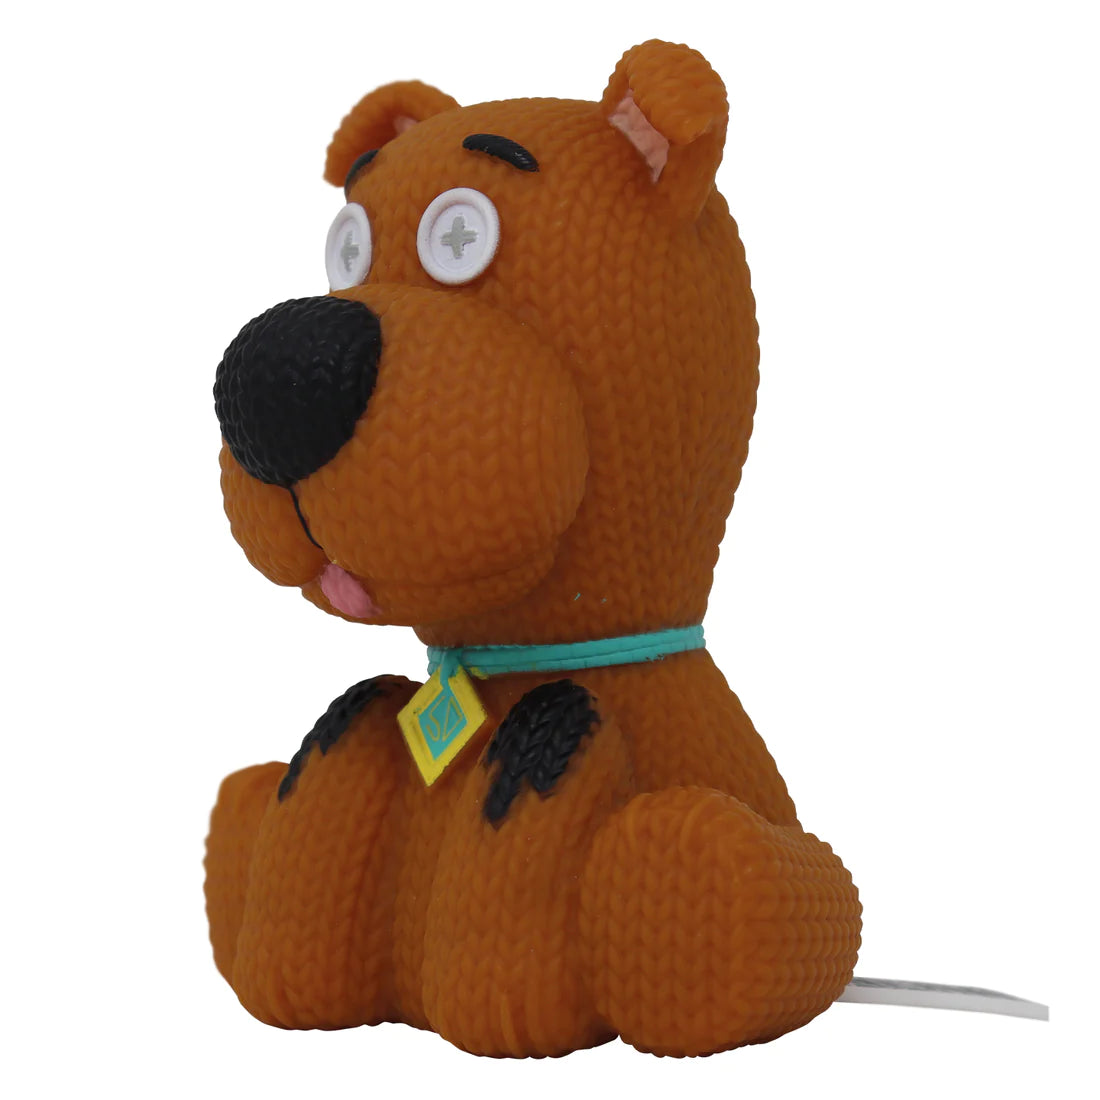 Scooby -Doo - Knit Series